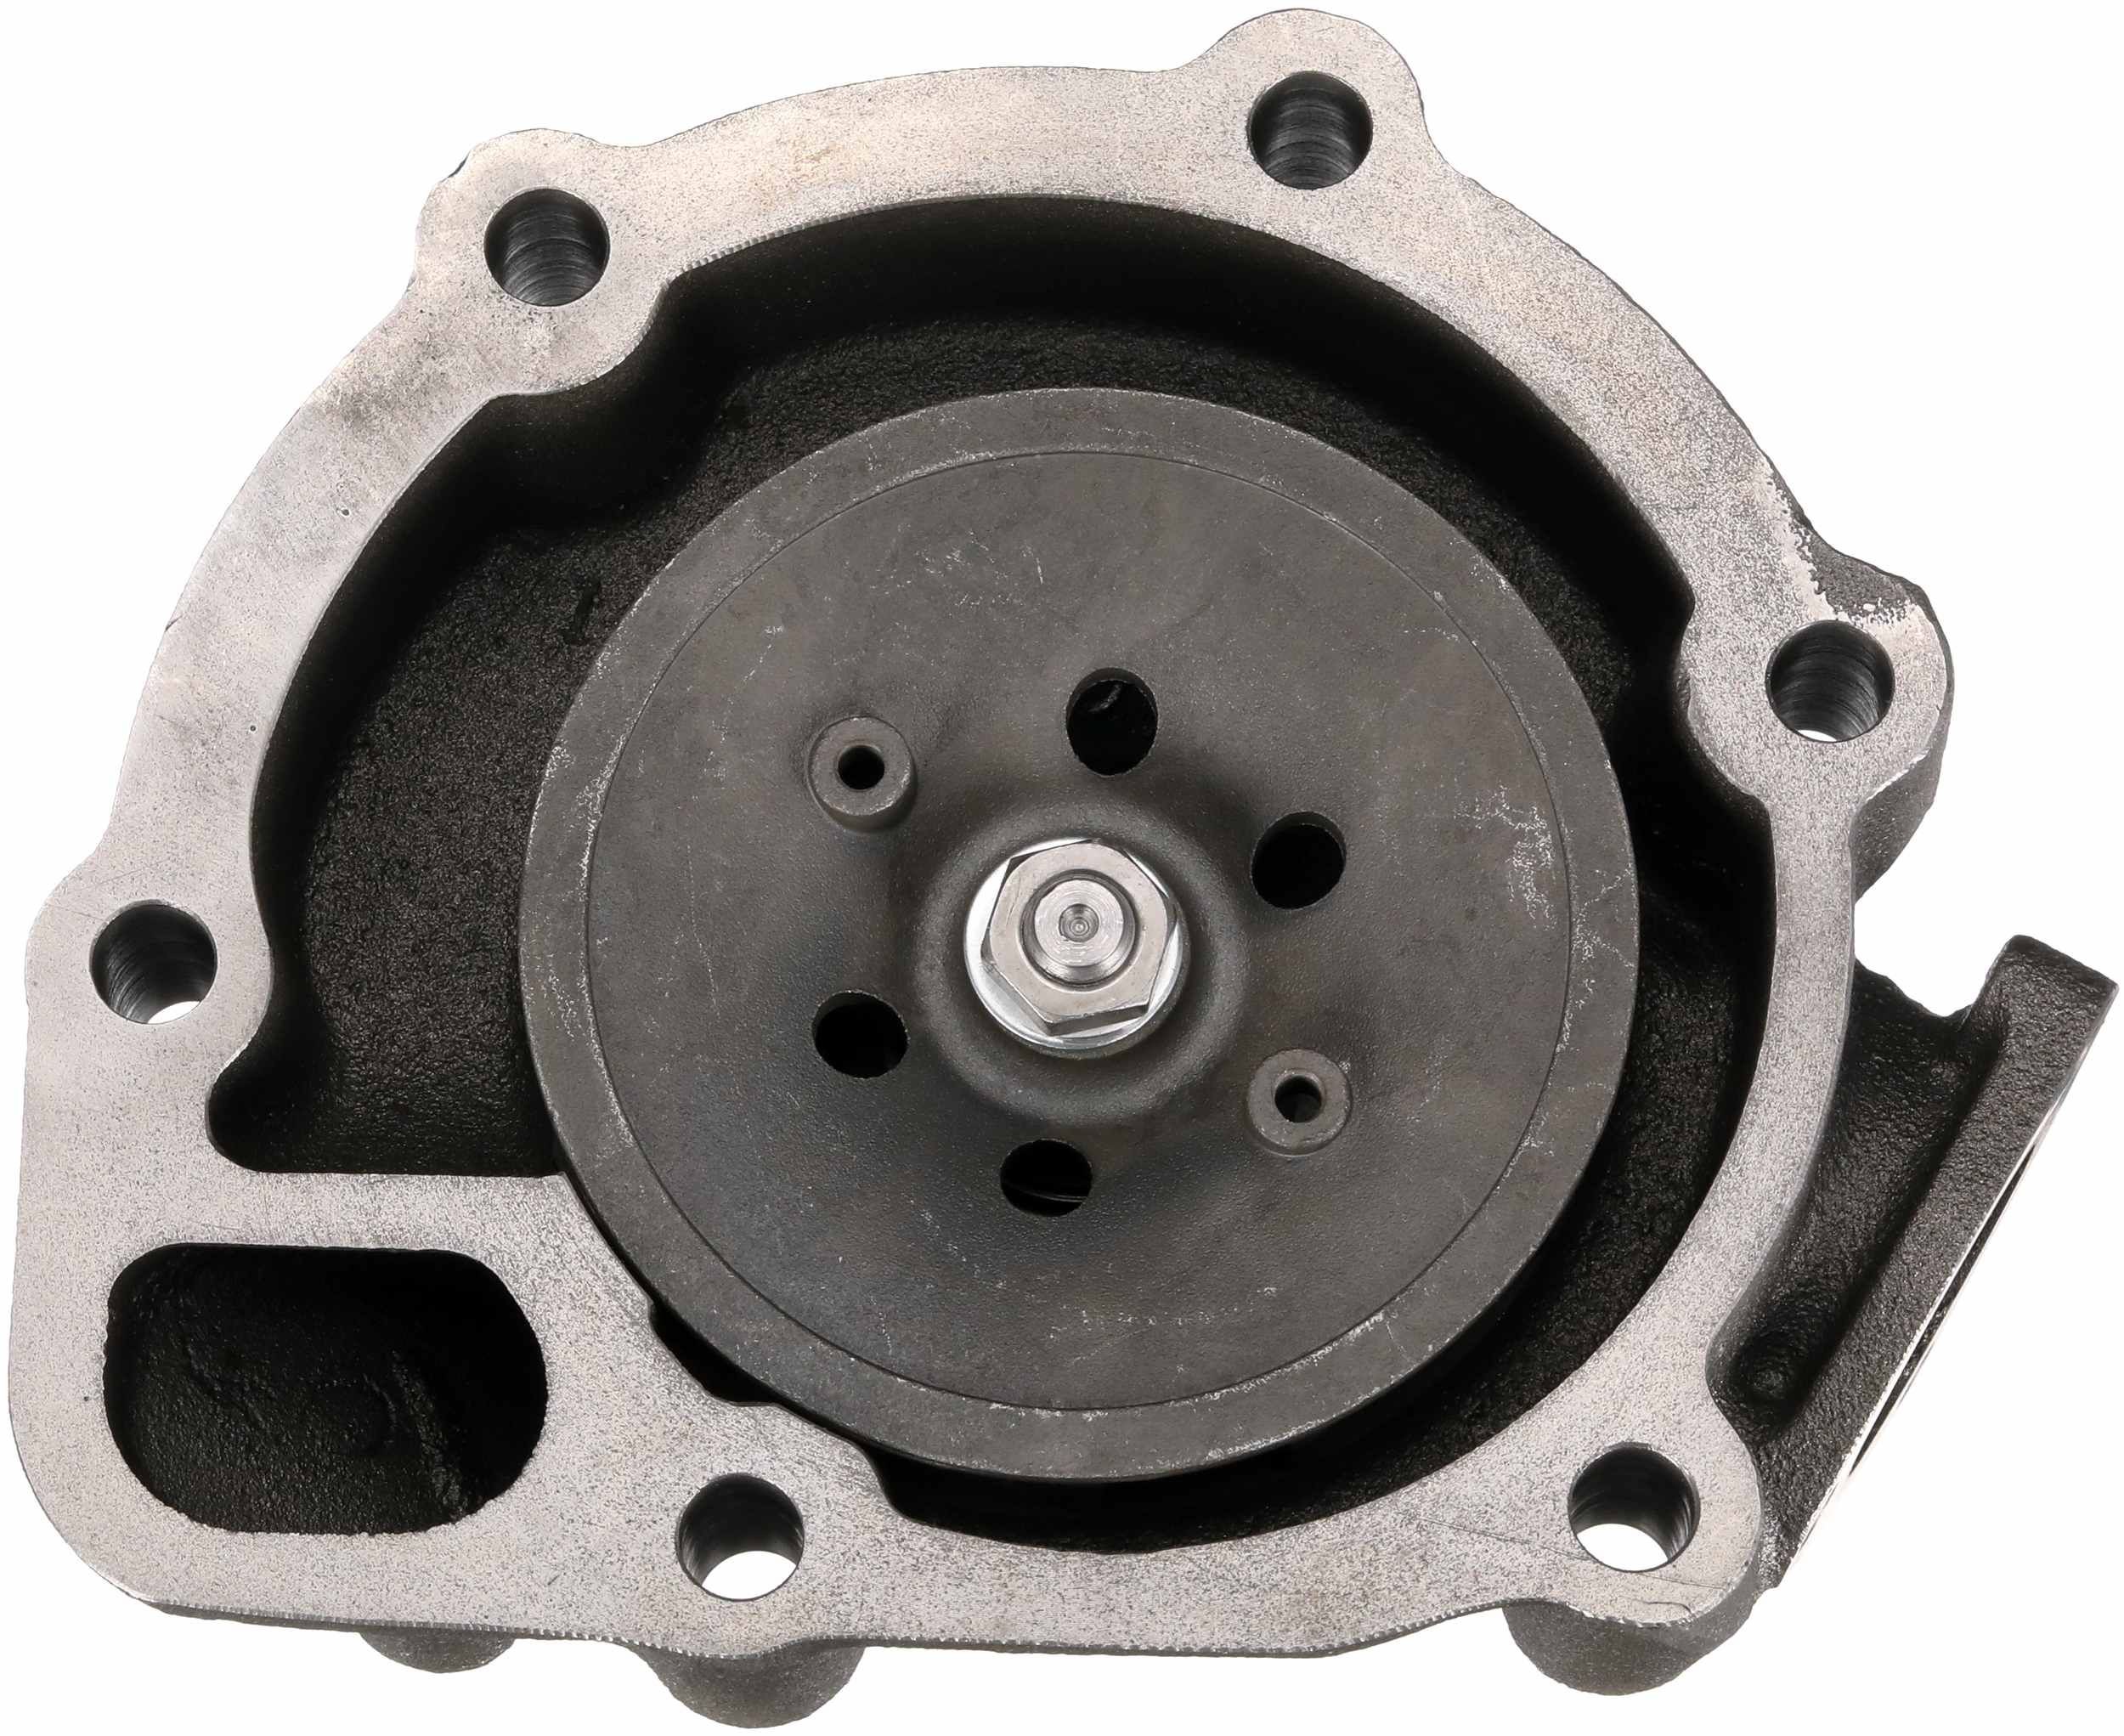 GATES 7702-15089 Water pump Metal, without belt pulley, for v-belt pulley, with gaskets/seals